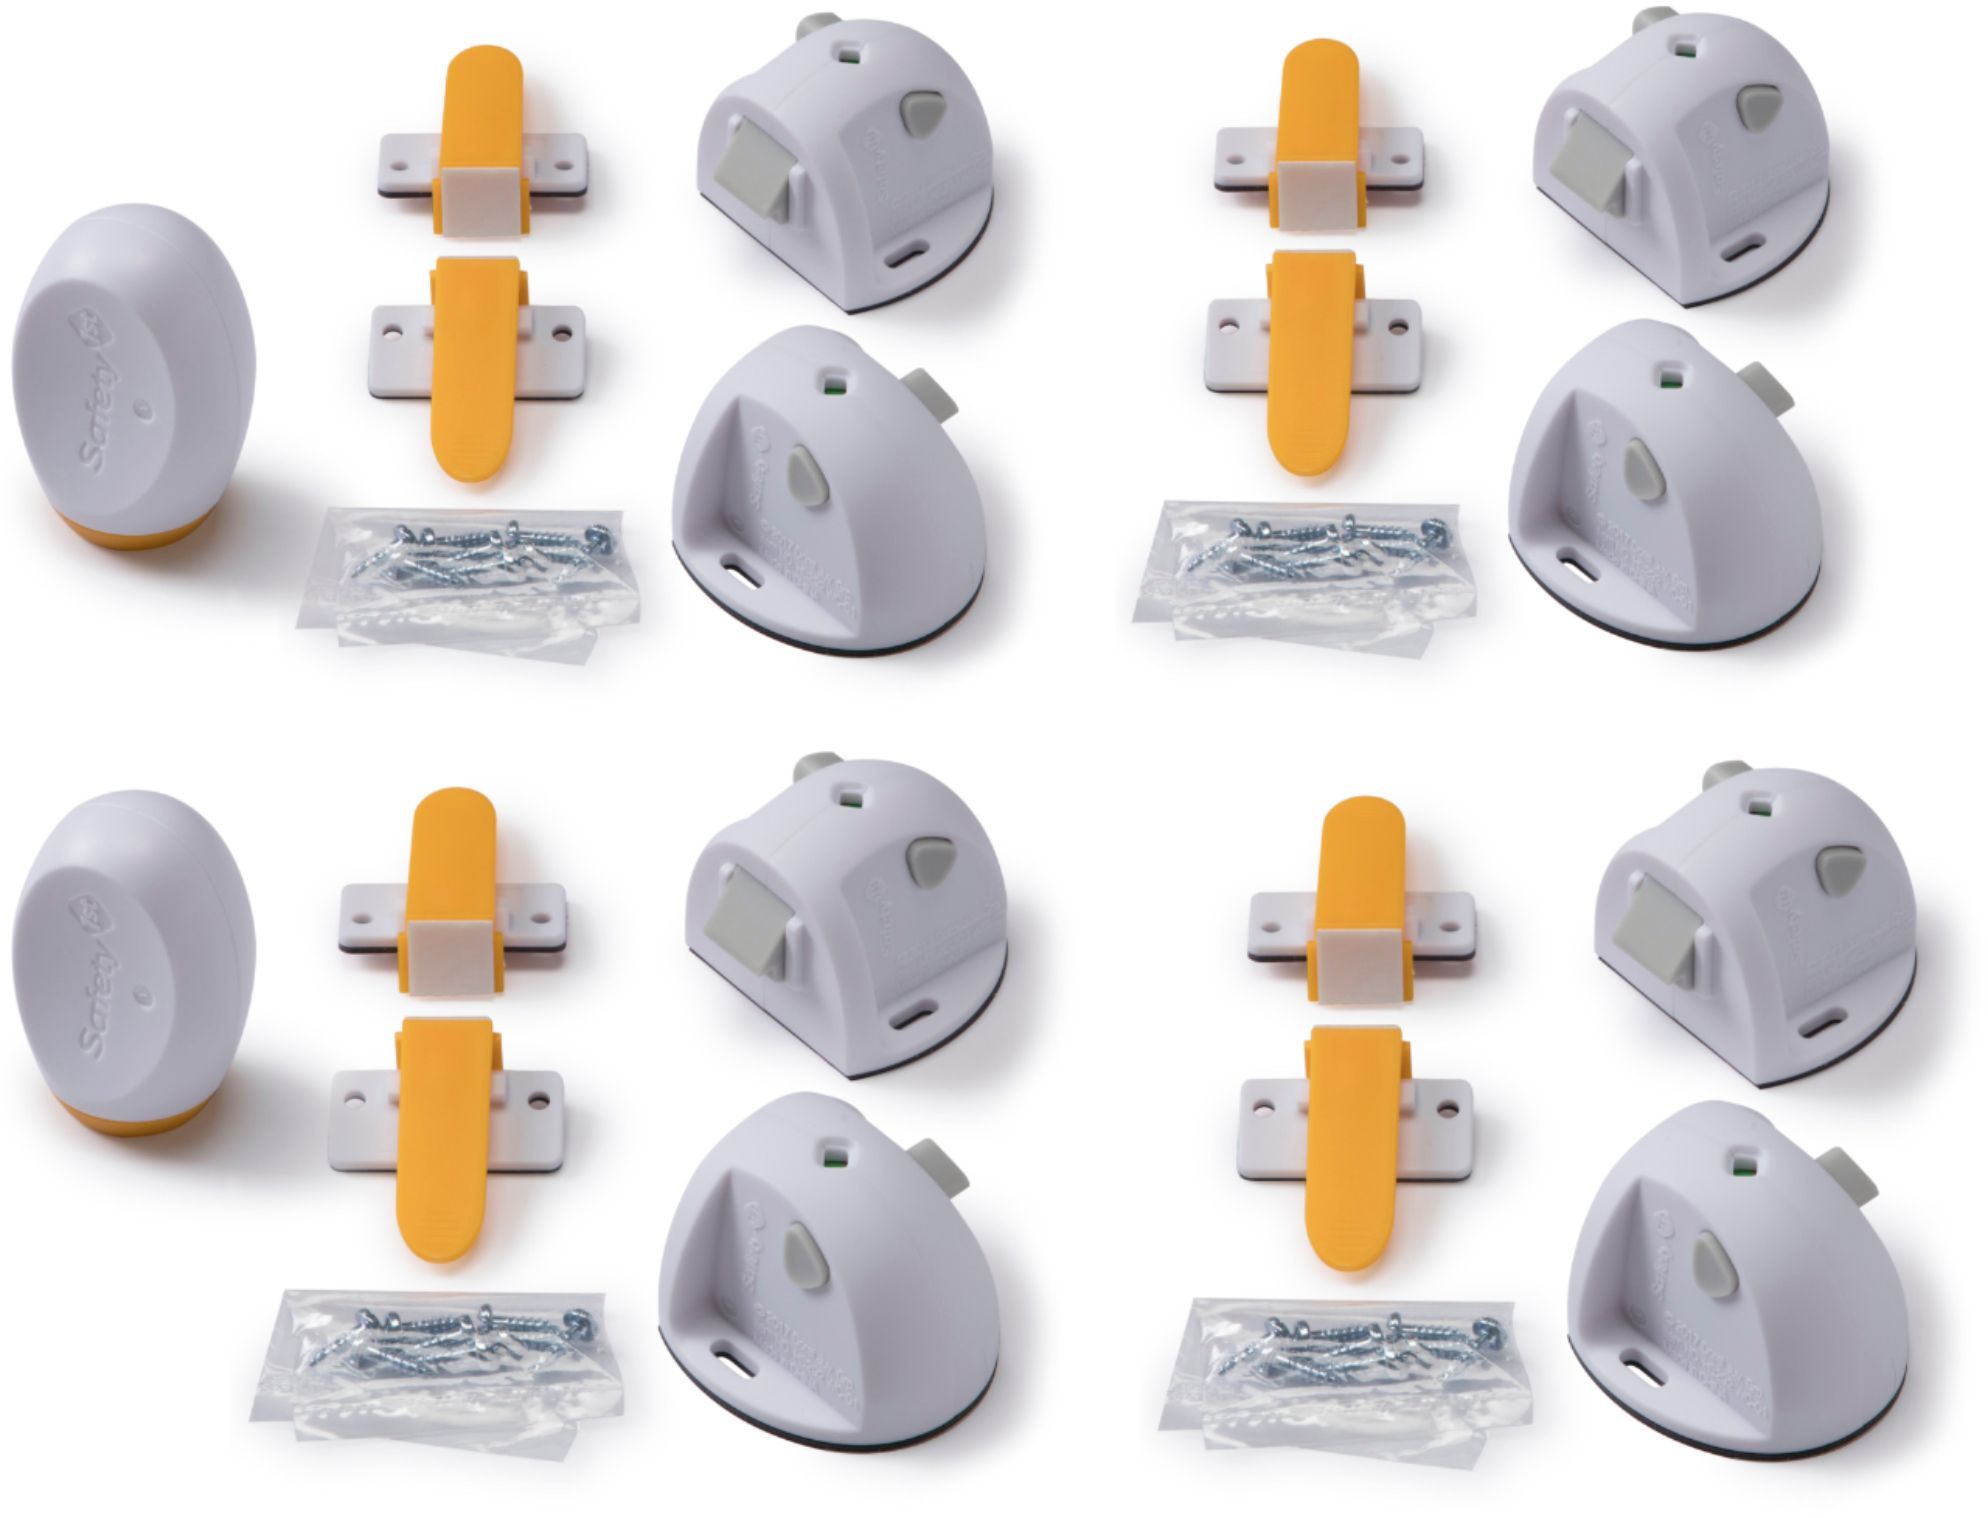 Safety 1st Adhesive Magnetic Lock System (5-Piece) HS293 - The